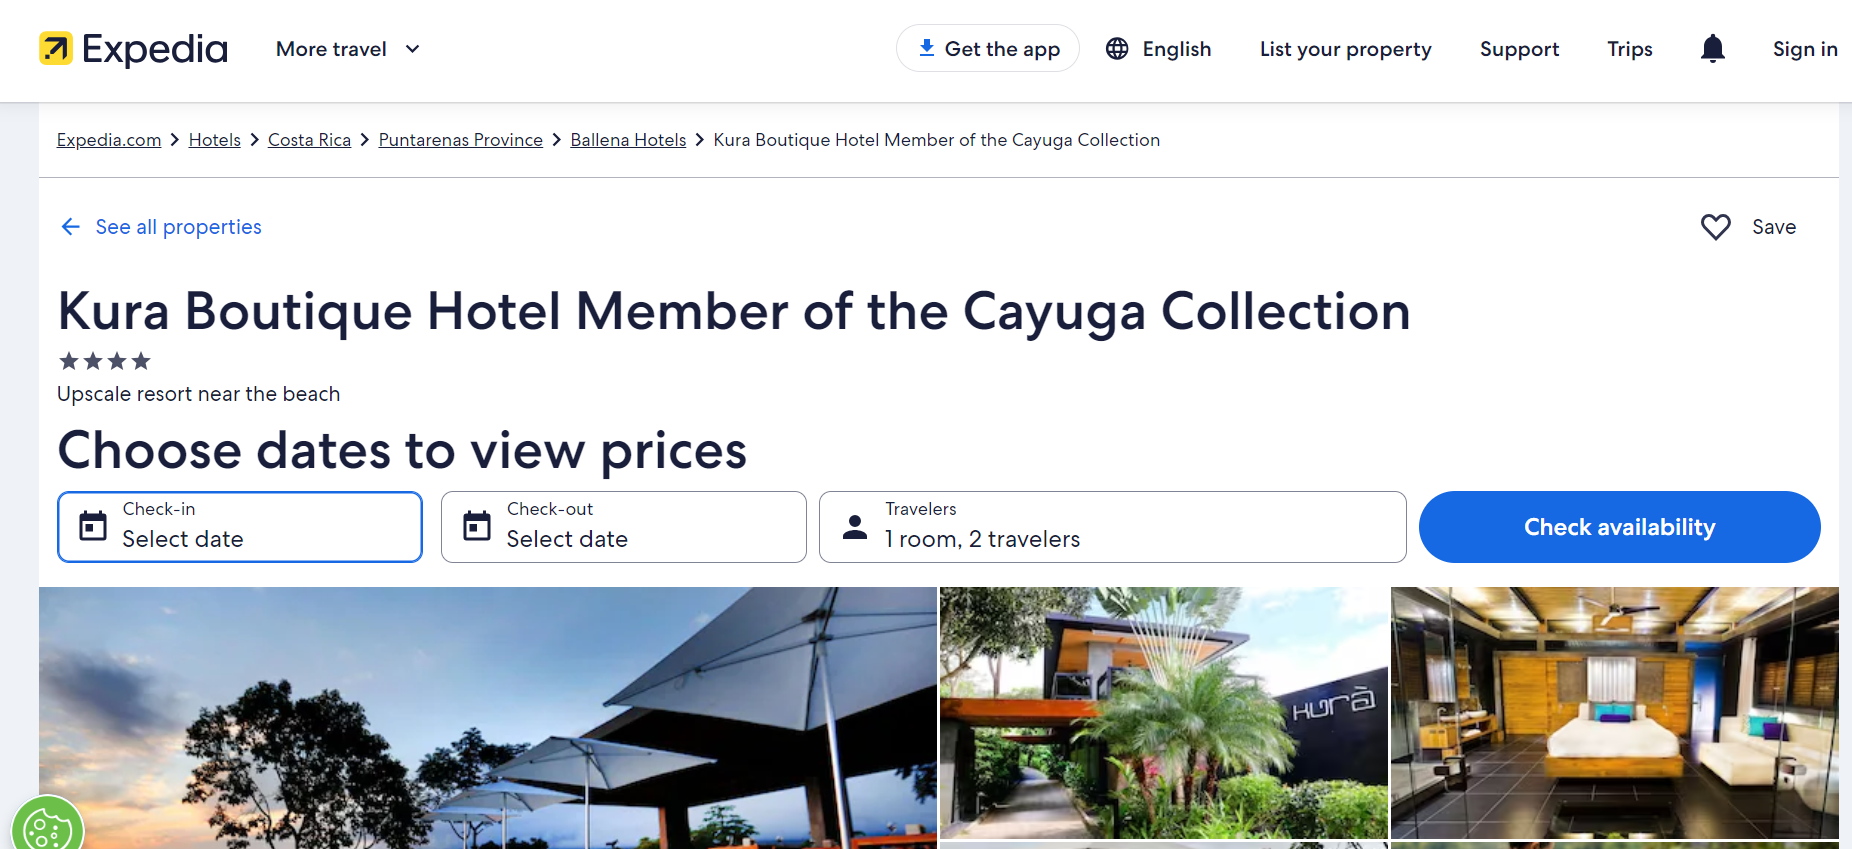 Kura Boutique Hotel Member of the Cayuga Collection